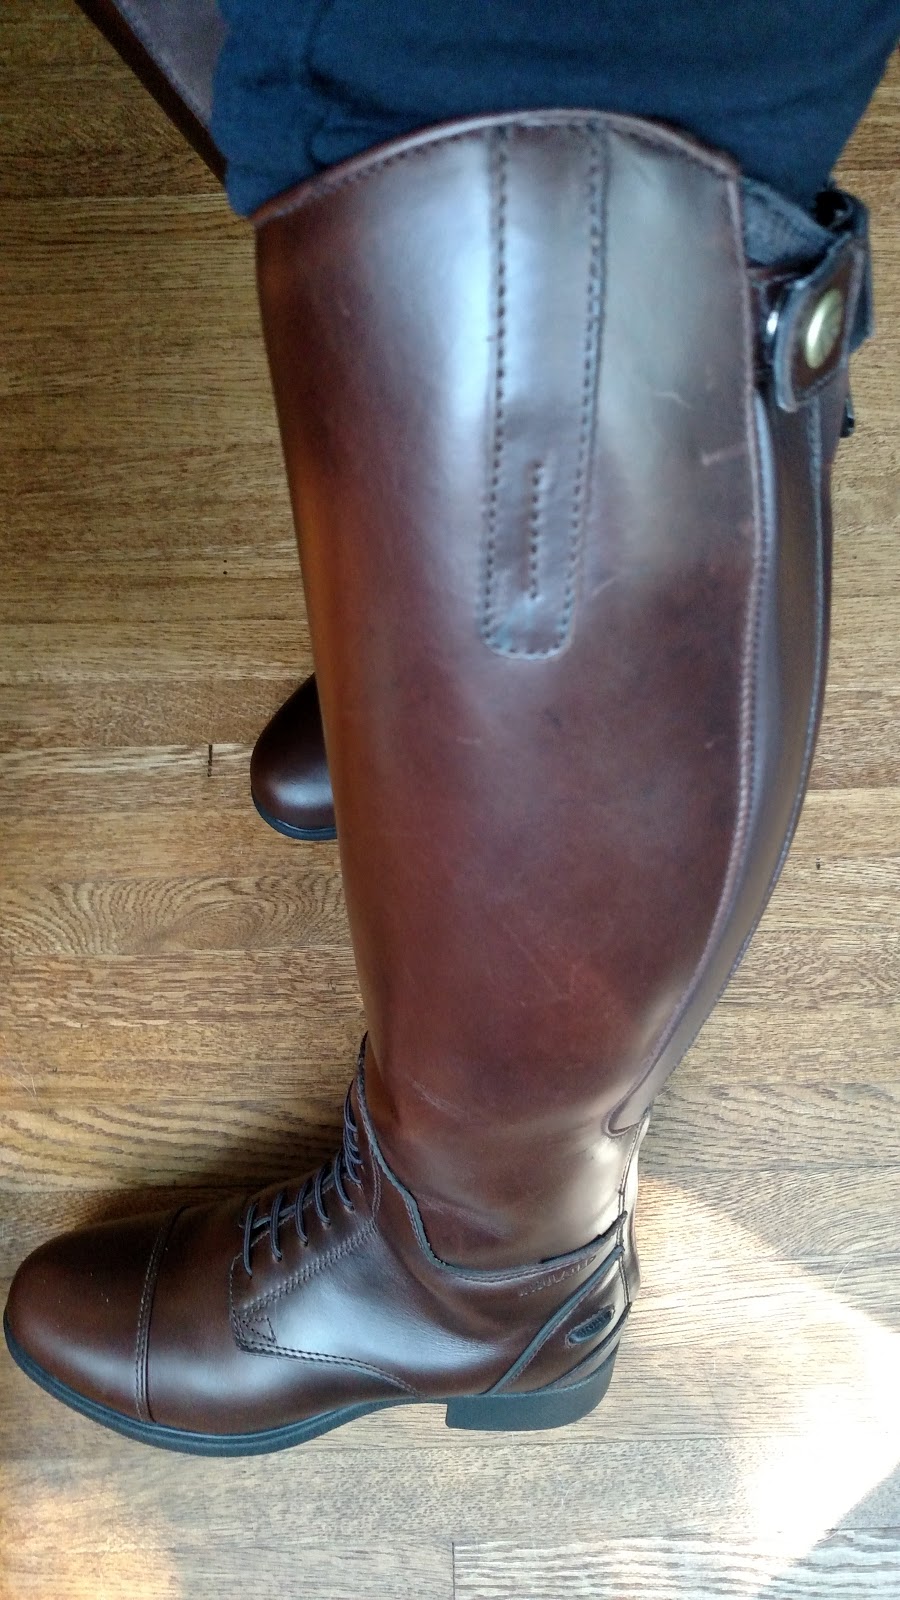 Han nul Uforudsete omstændigheder Cob Jockey: Product Review: BROWN Ariat Bromont Pro Tall H2O Insulated Boot